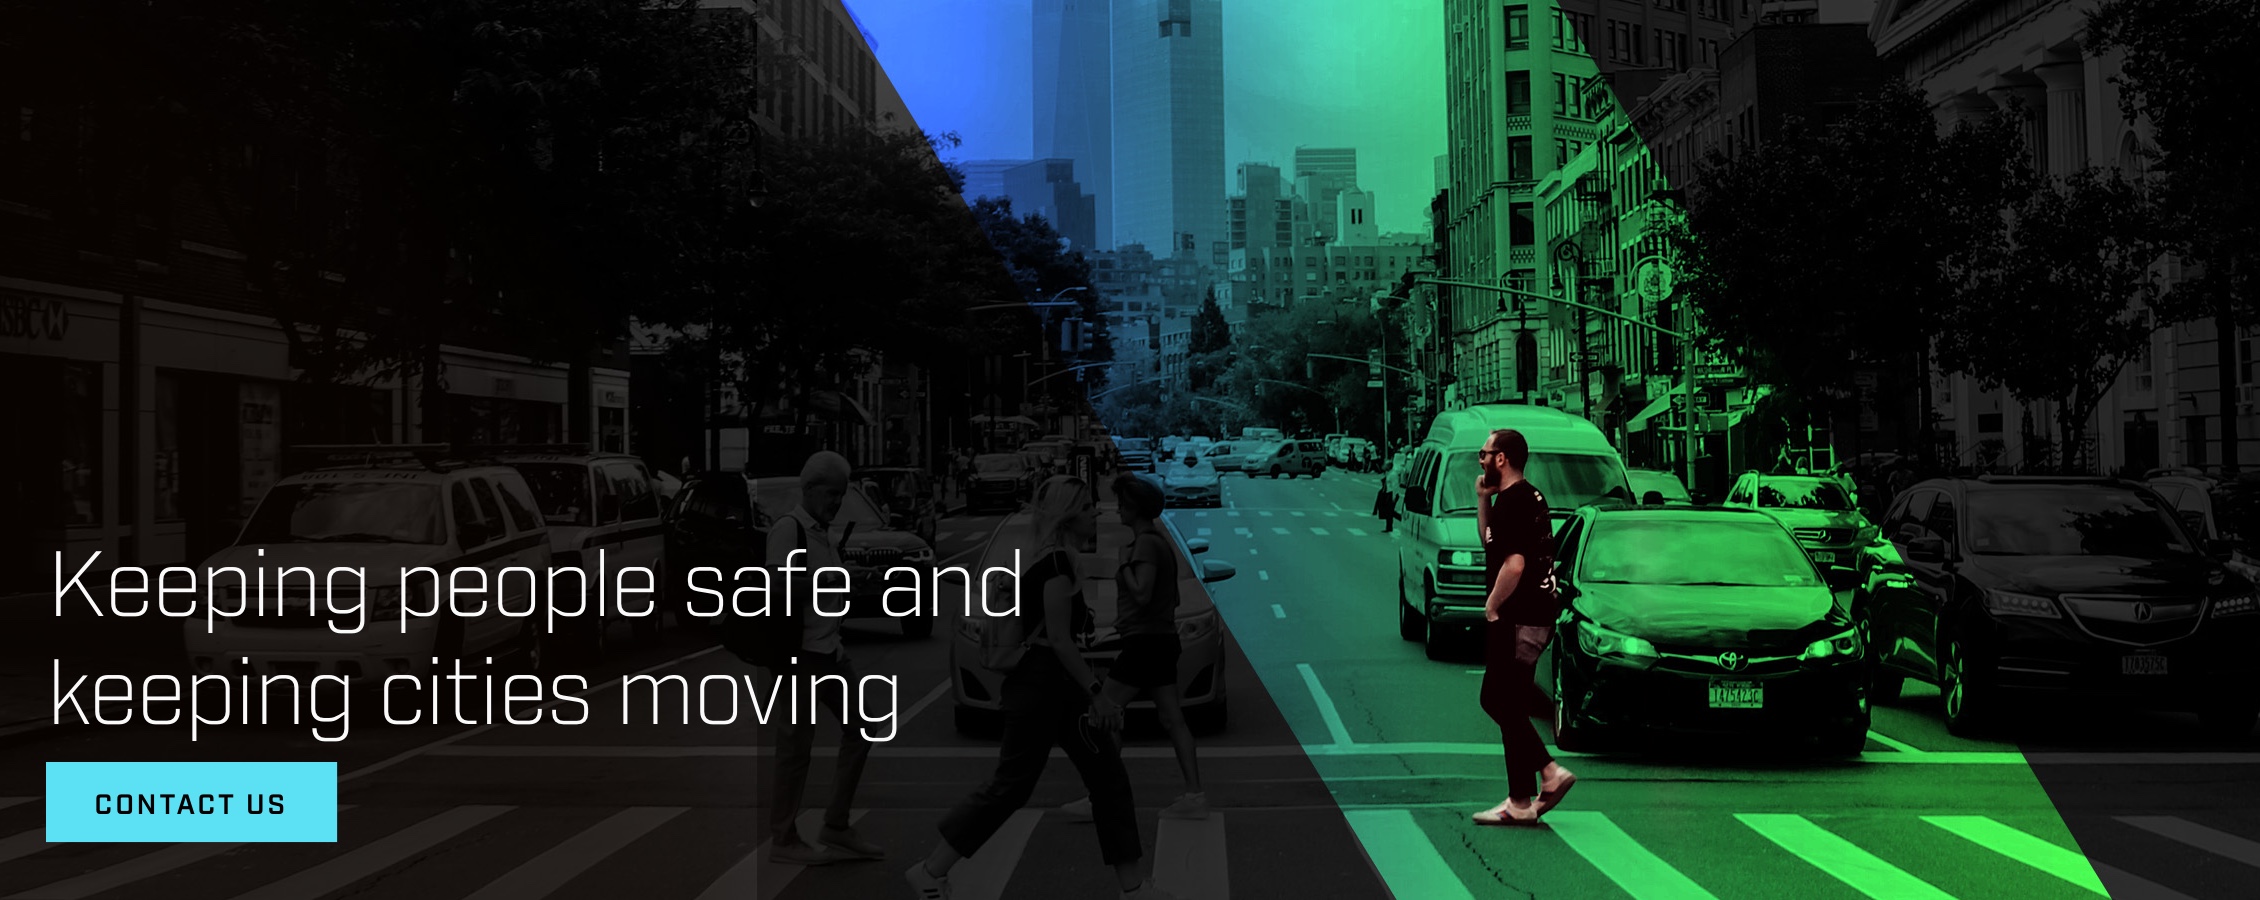 Keeping people safe and keeping cities moving. Learn More